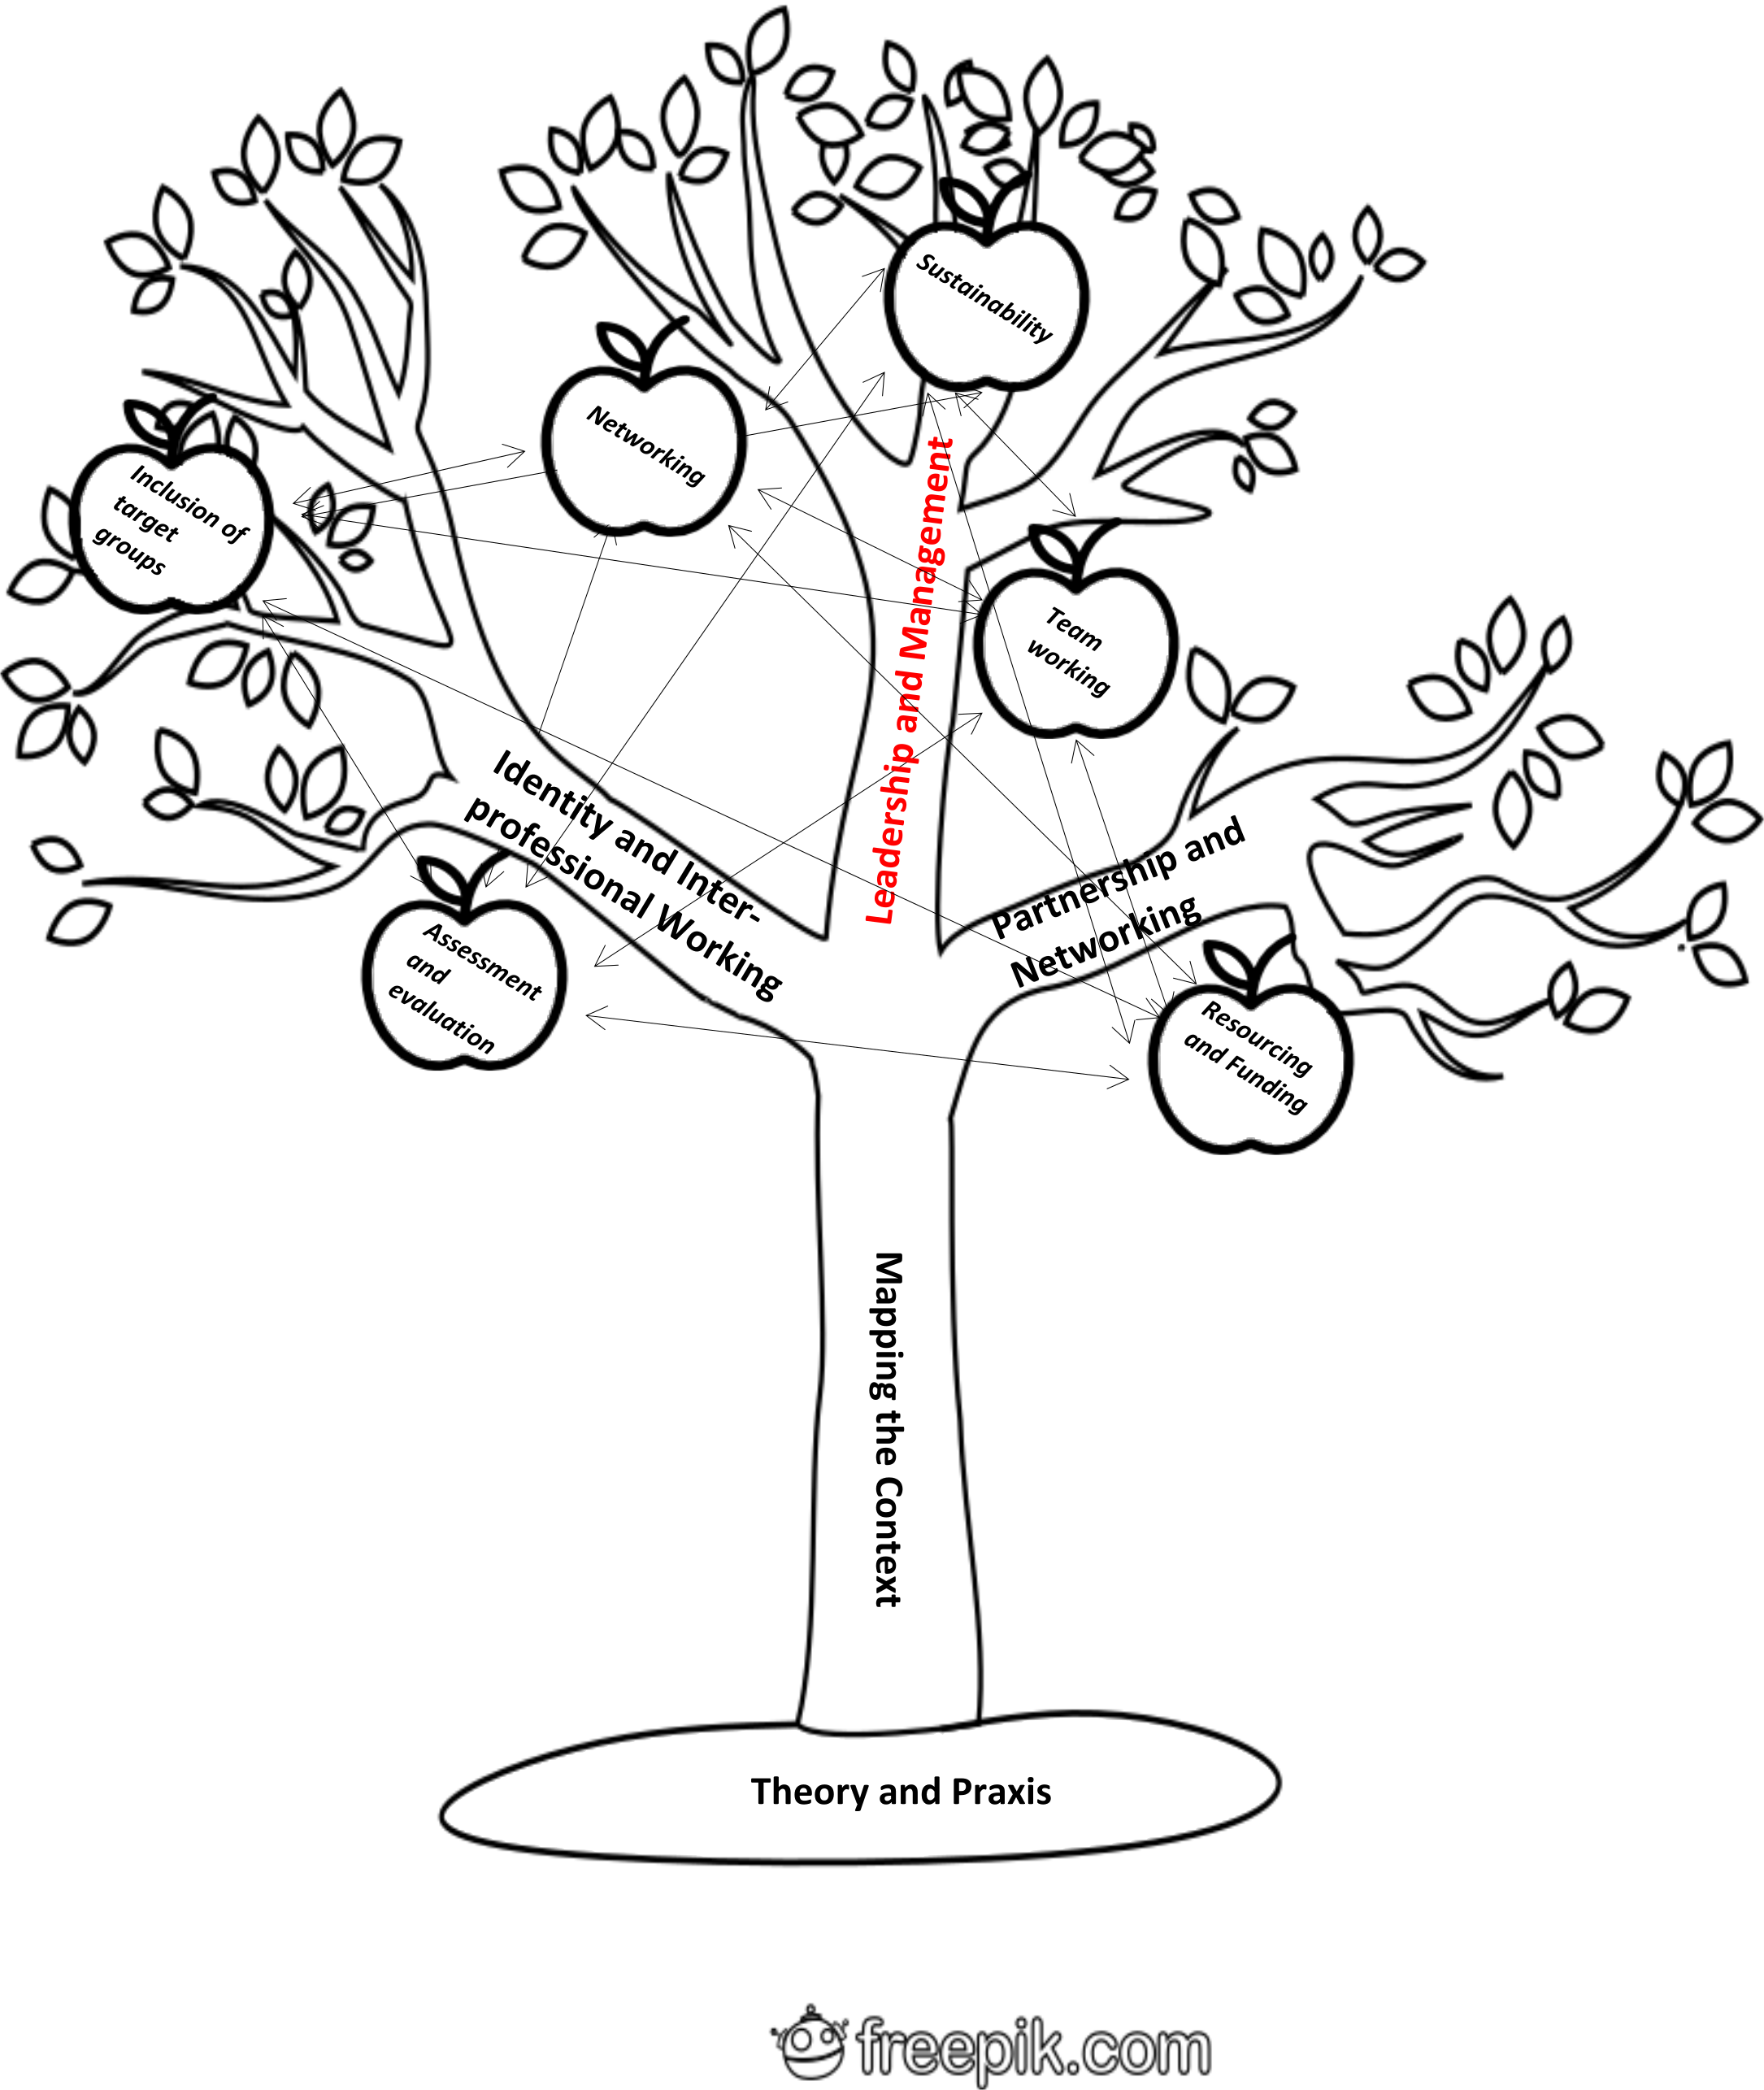 Theory and Praxis Tree 